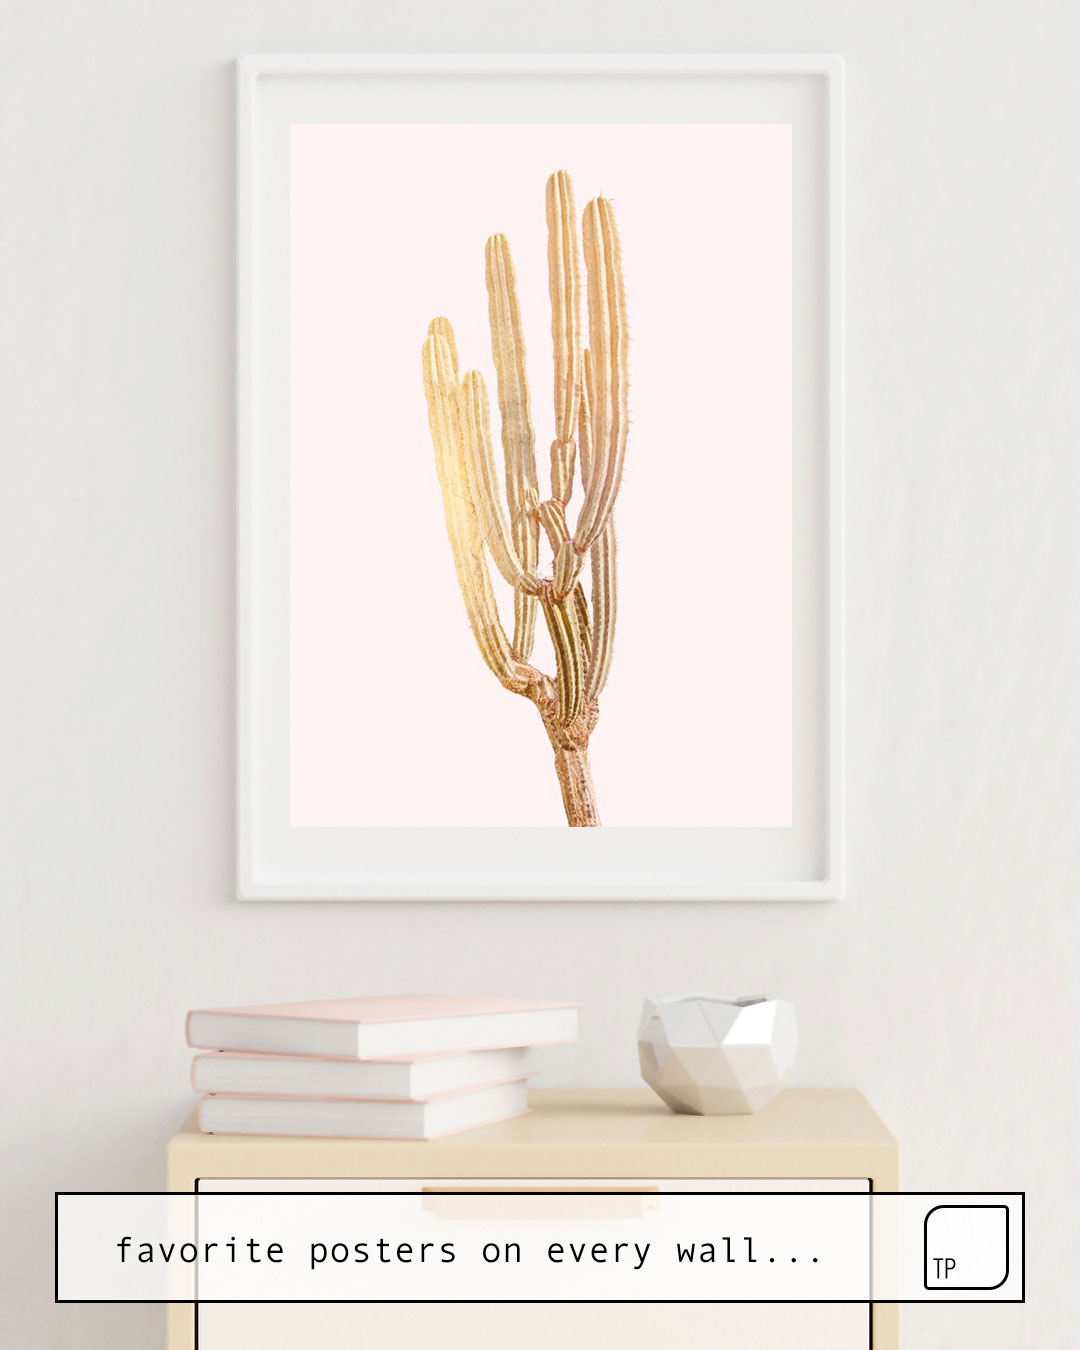 Poster | GOLDEN CACTUS by Andreas Lie